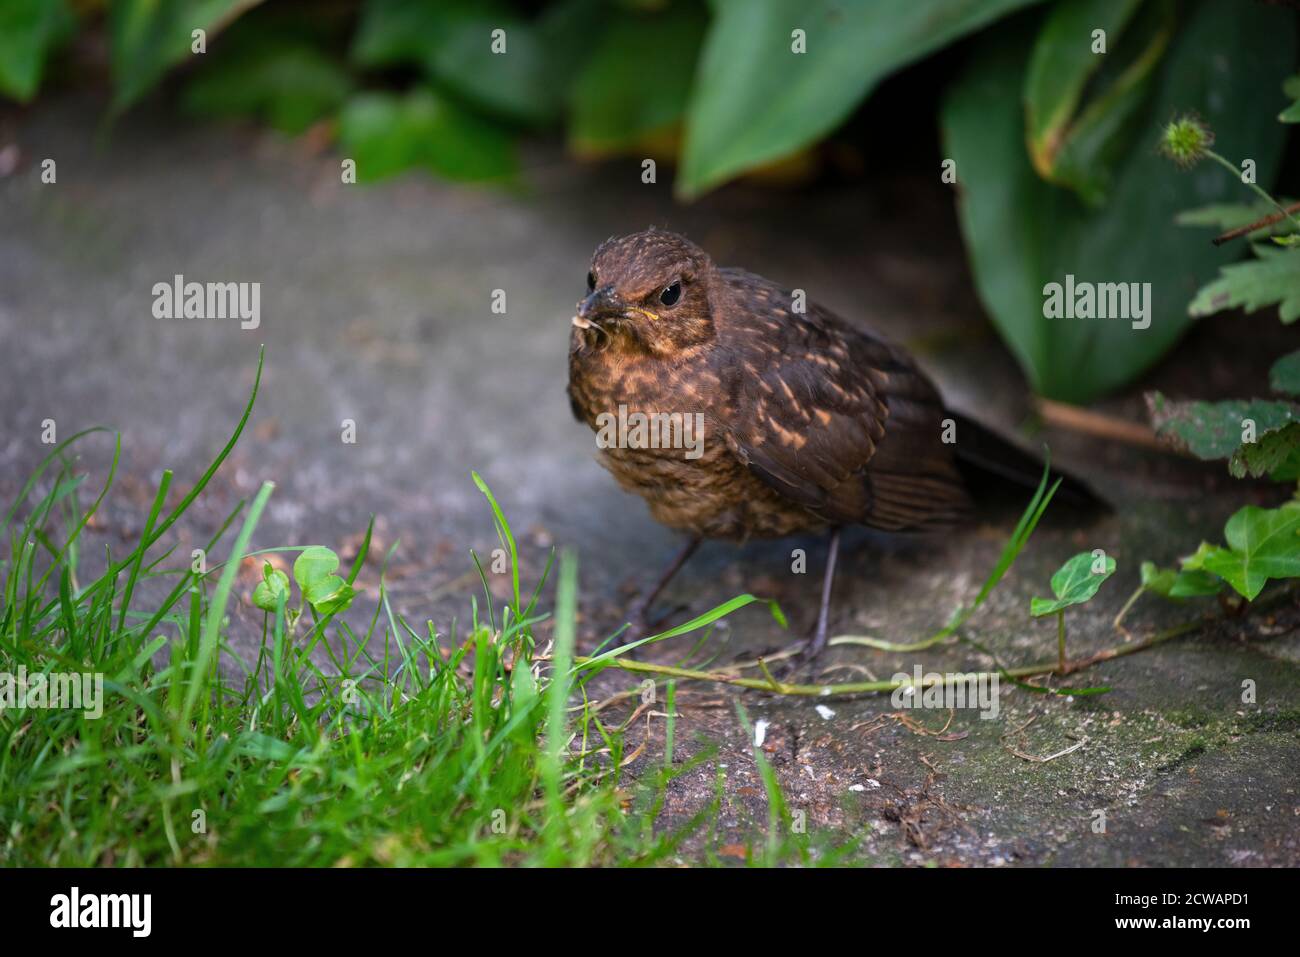 Blackbird Juvenile Thaxted Essex England 2020 Wikipedia: The common blackbird (Turdus merula) is a species of true thrush. It is also called the Euras Stock Photo